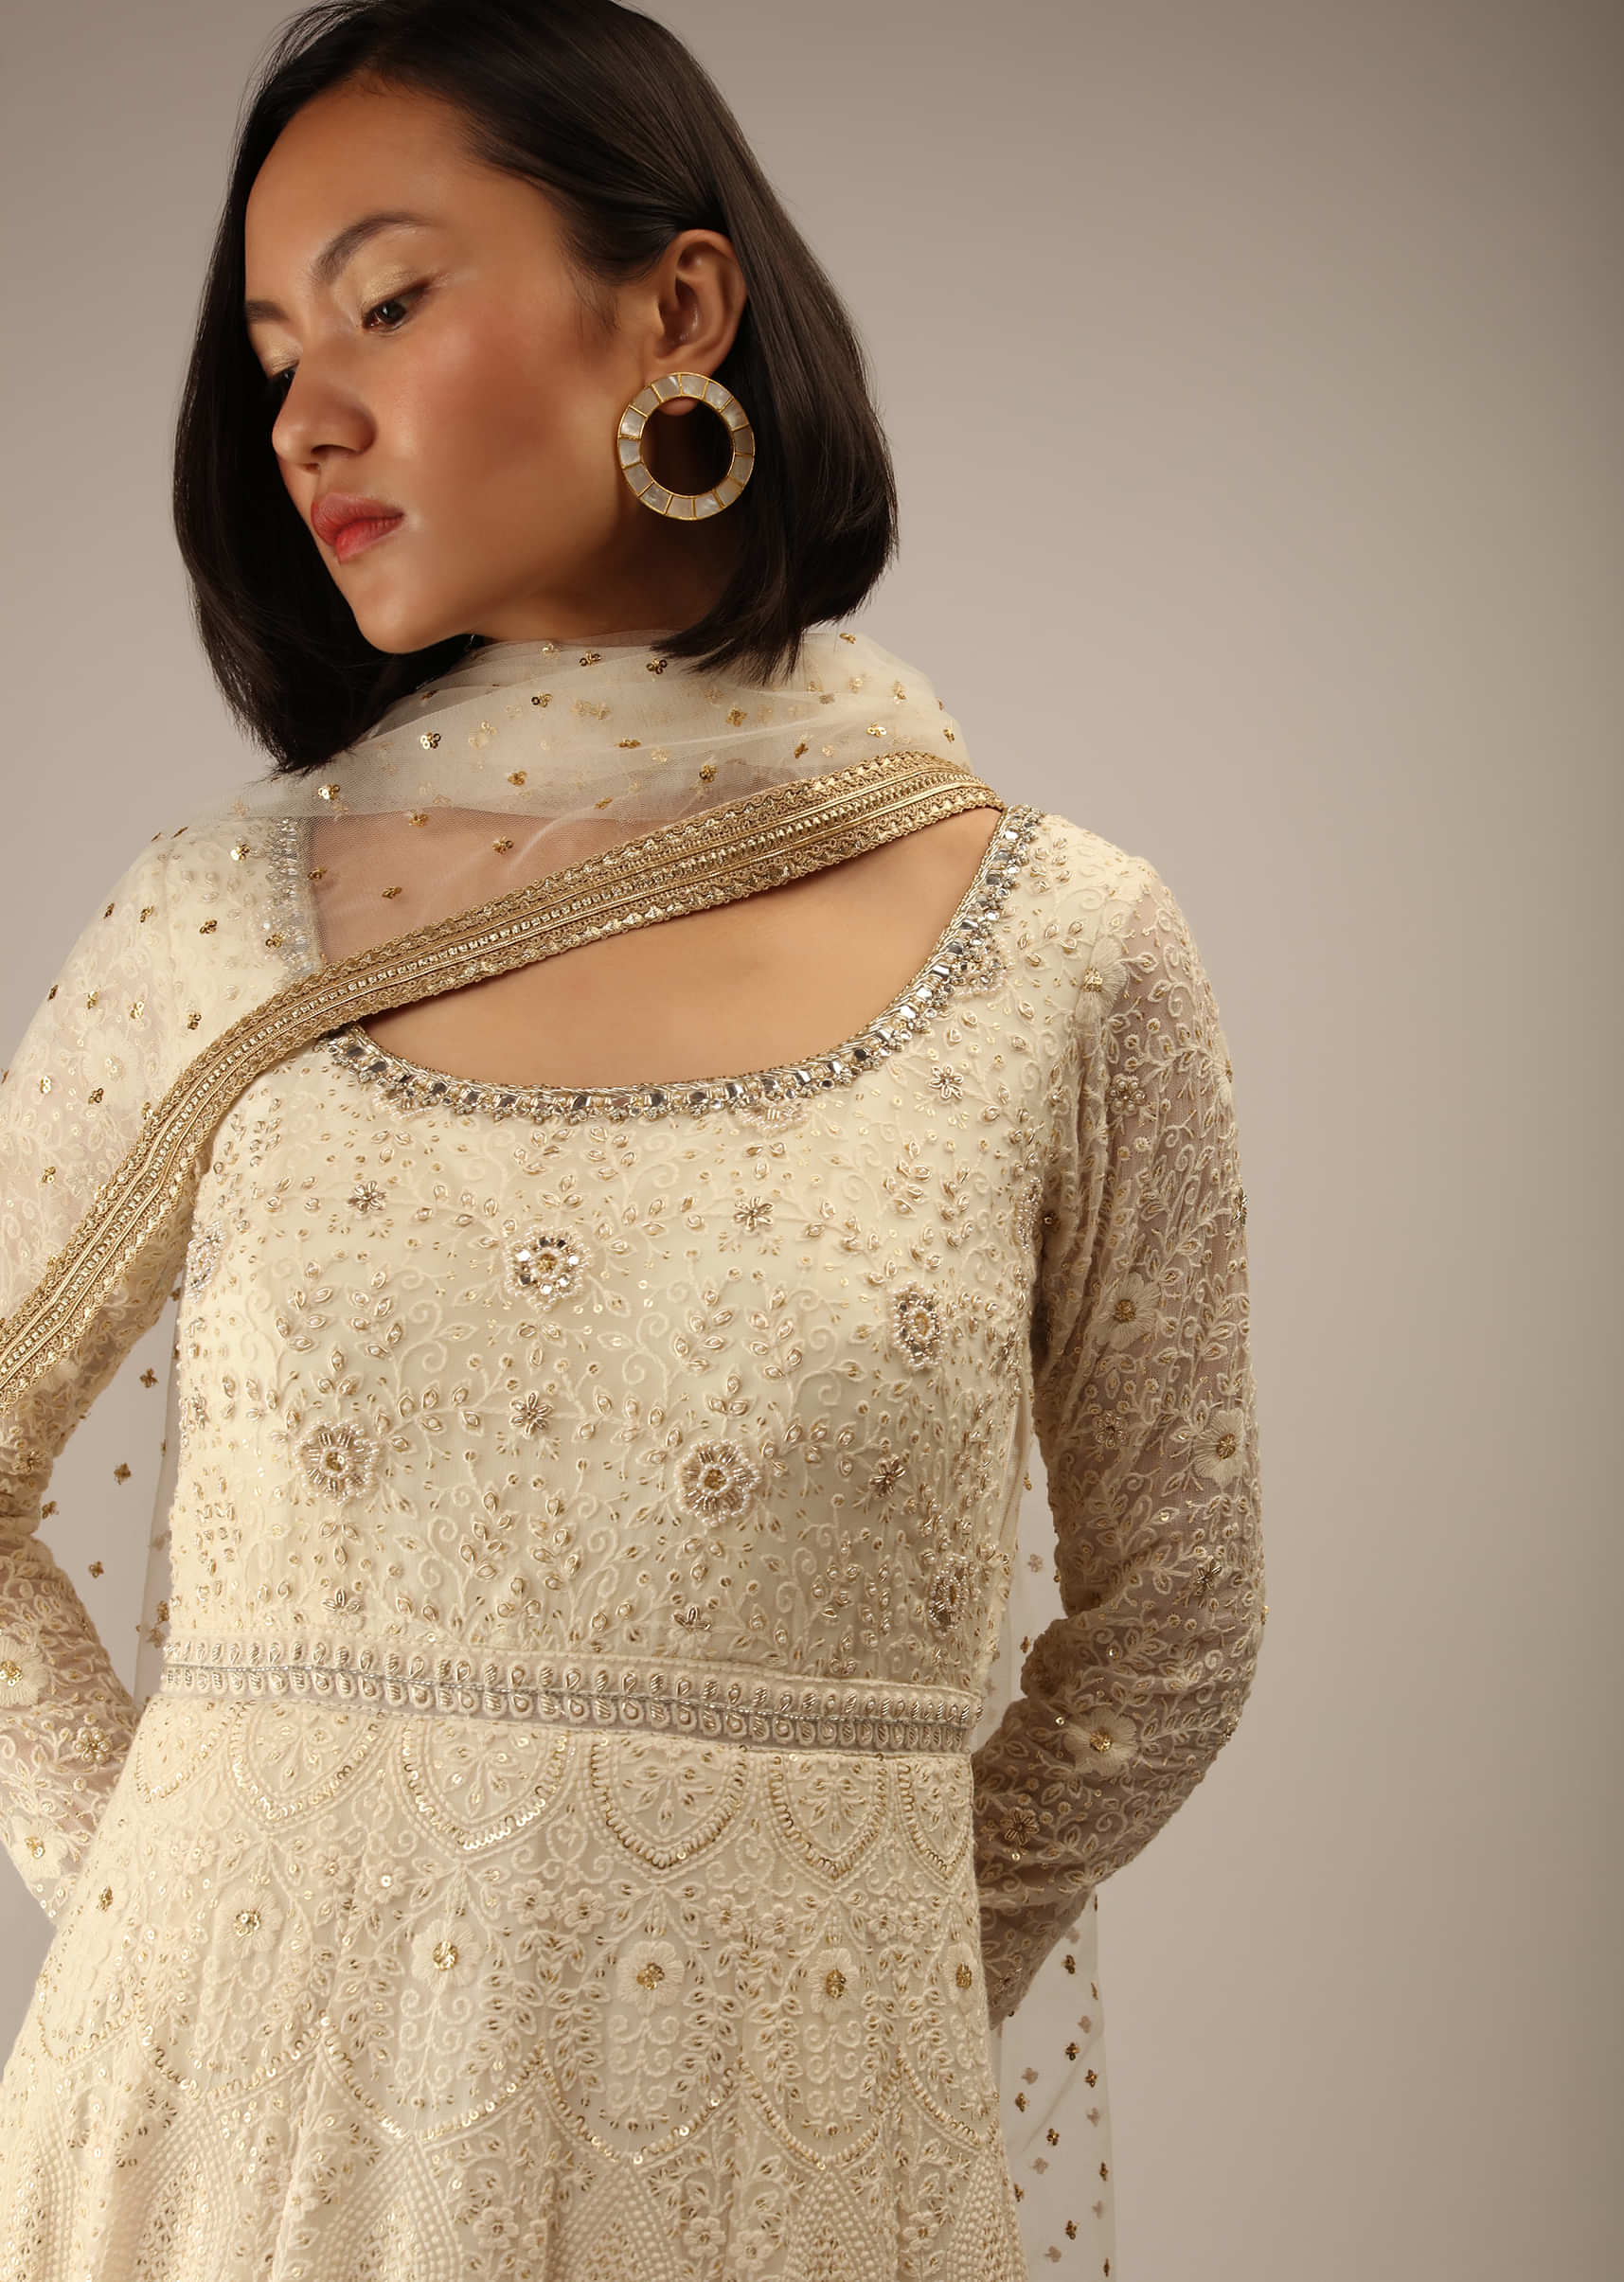 Off White Anarkali Suit In Georgette With Lucknowi Thread And Sequins Embroidered Mughal Kalis And Full Sleeves